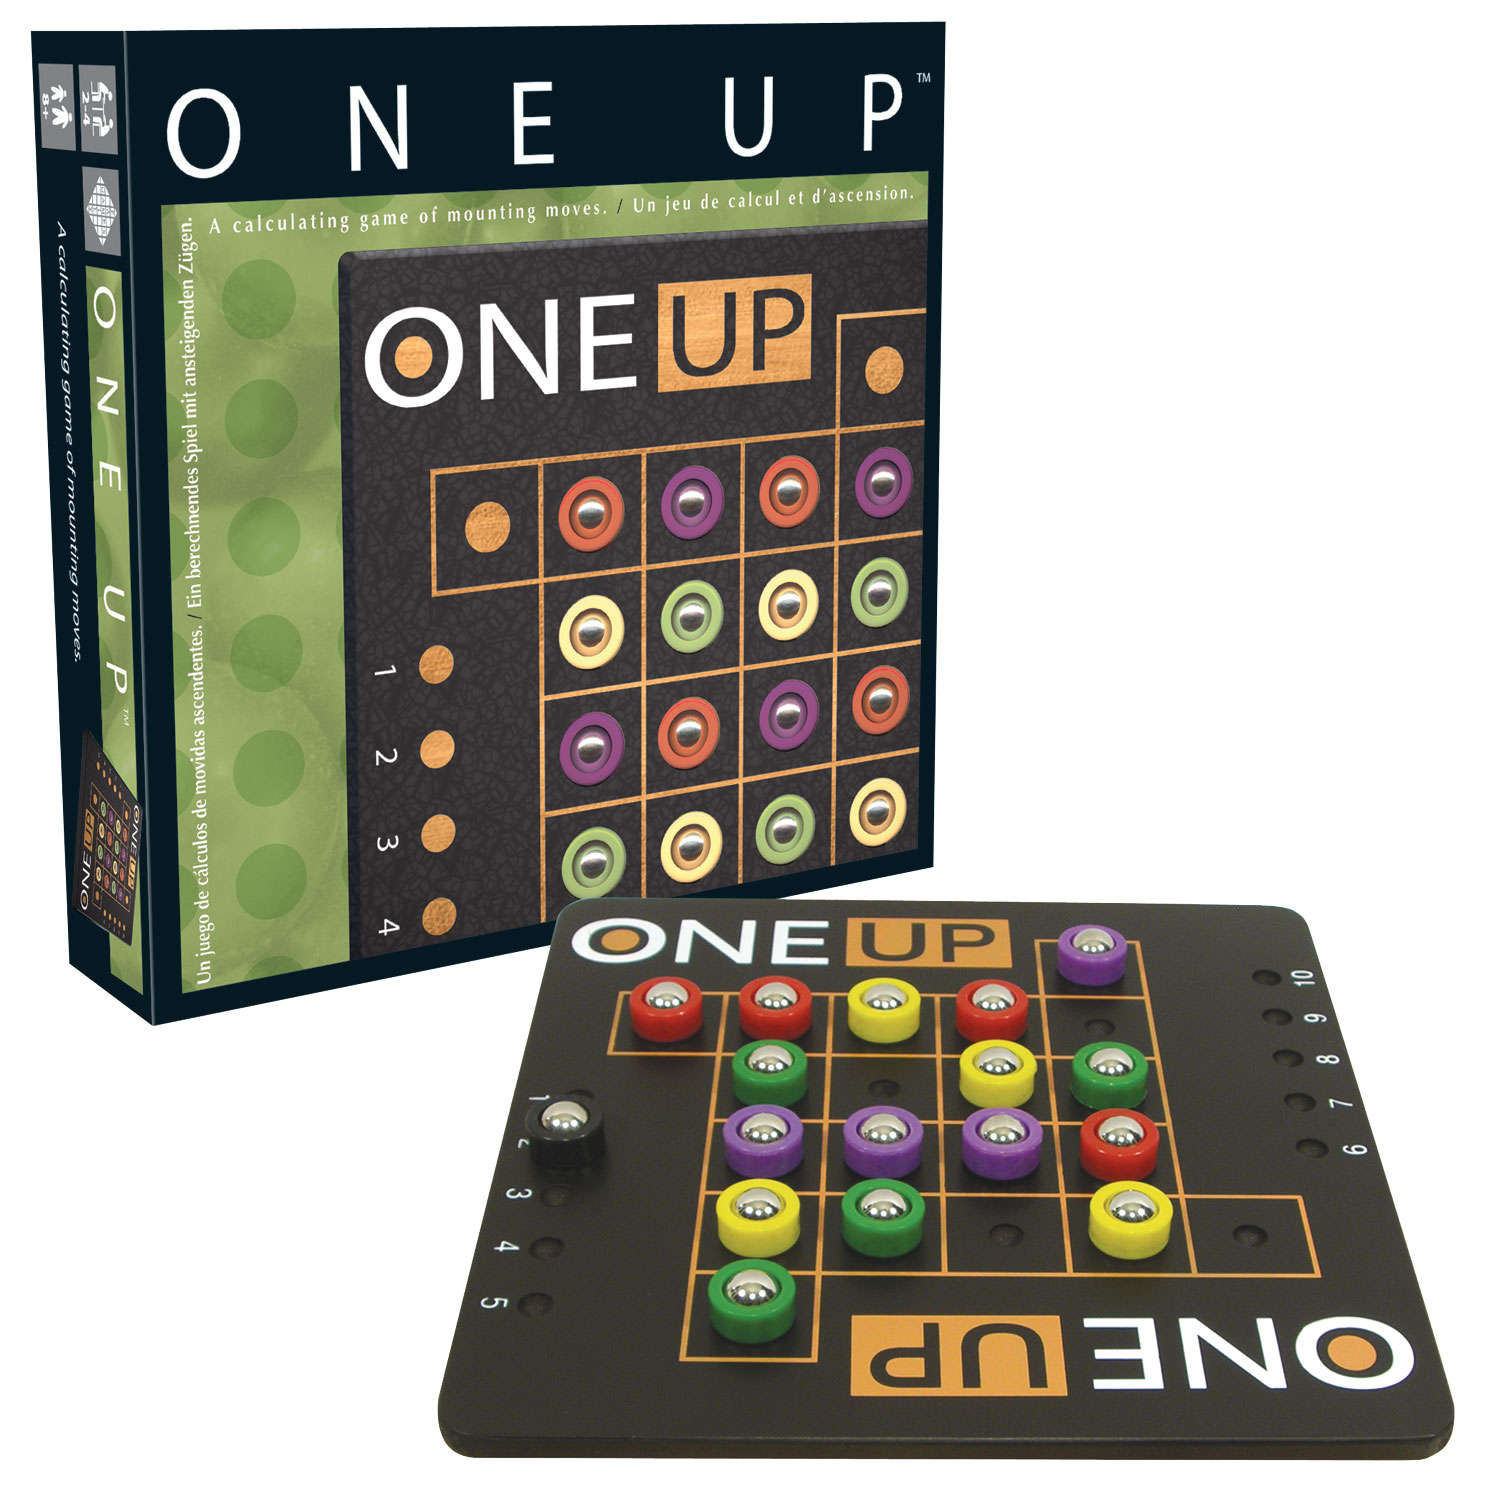 One Up